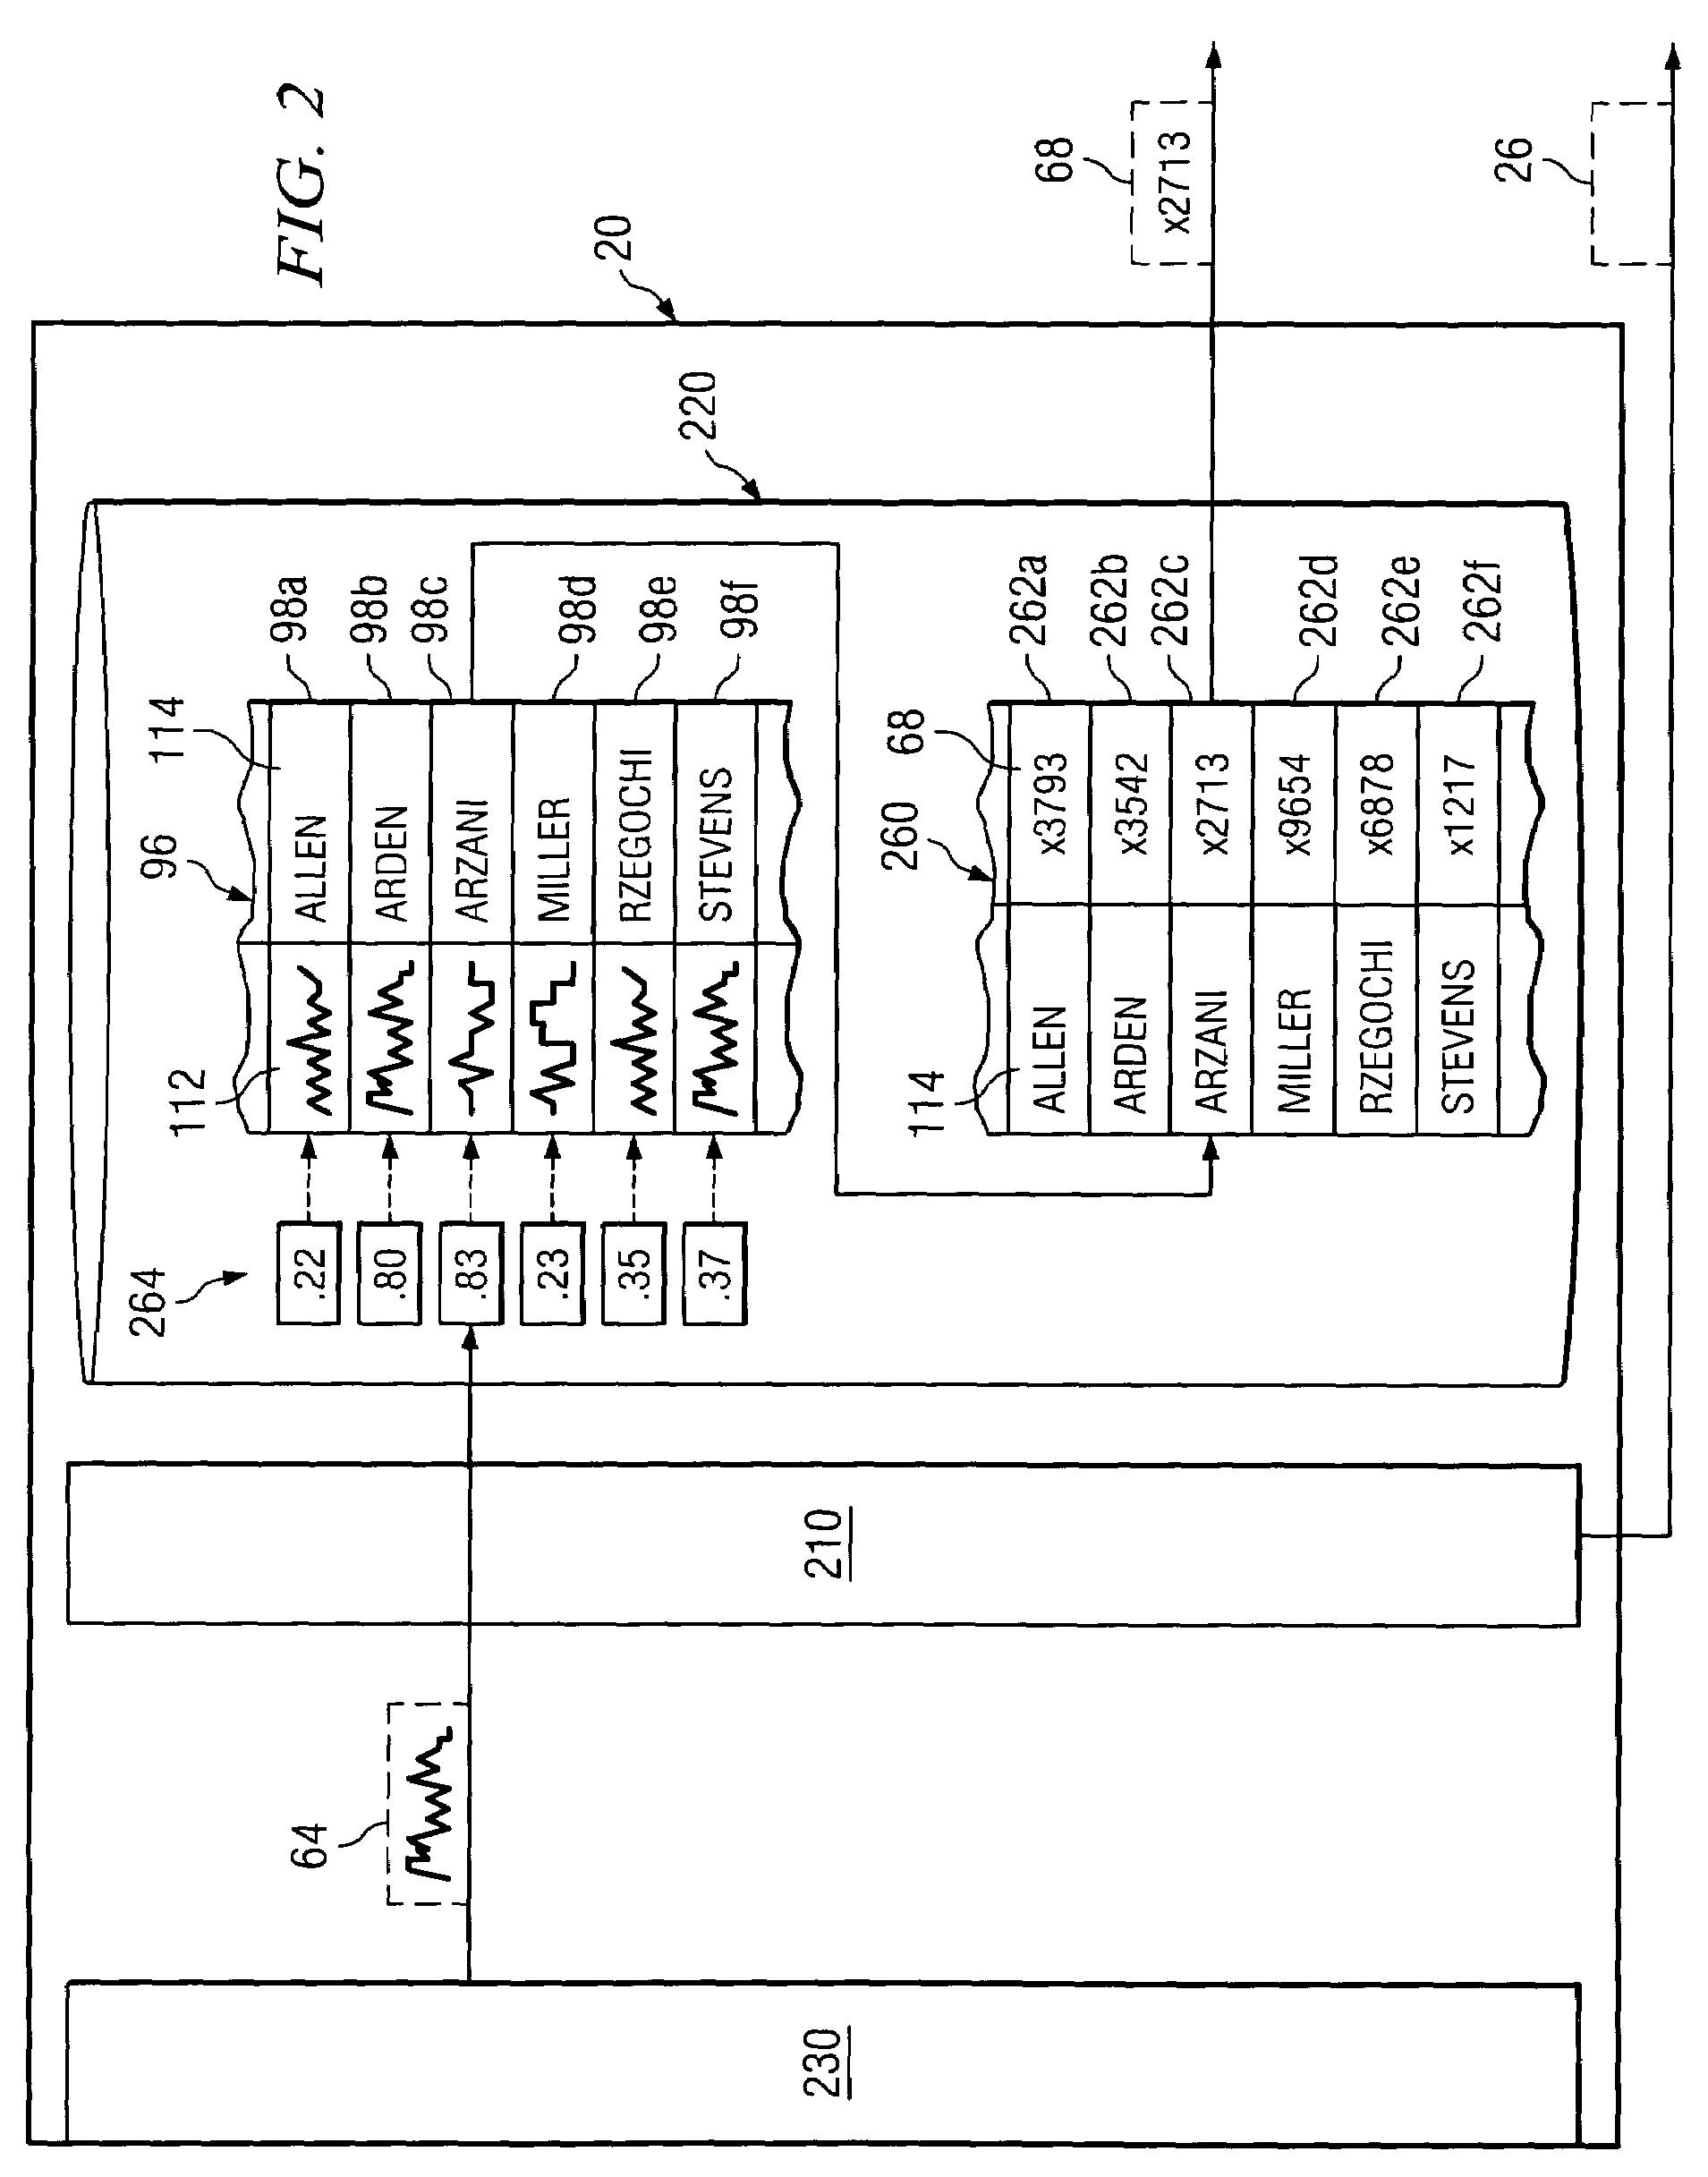 System and method for maintaining a speech-recognition grammar